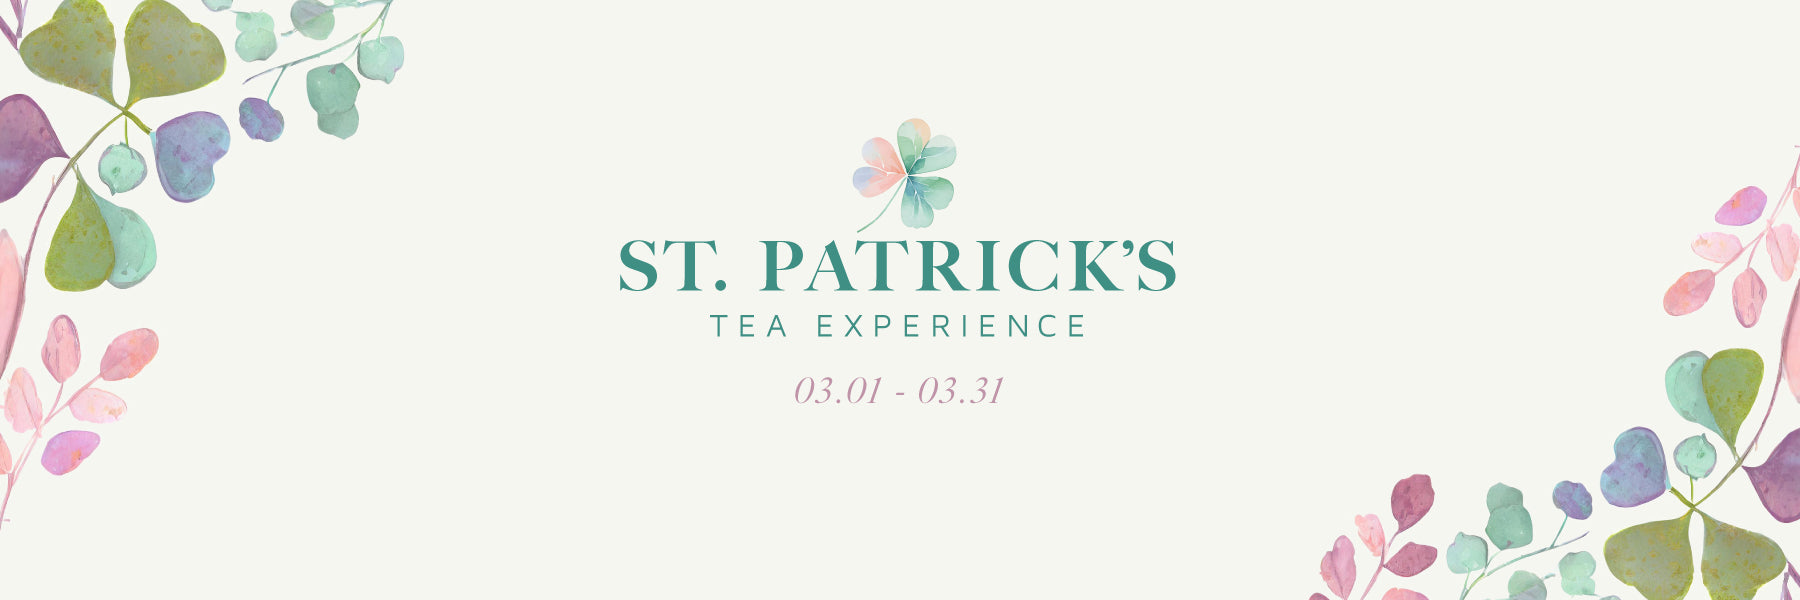 St Patrick's Day Tea Experience - Upcoming Events Page